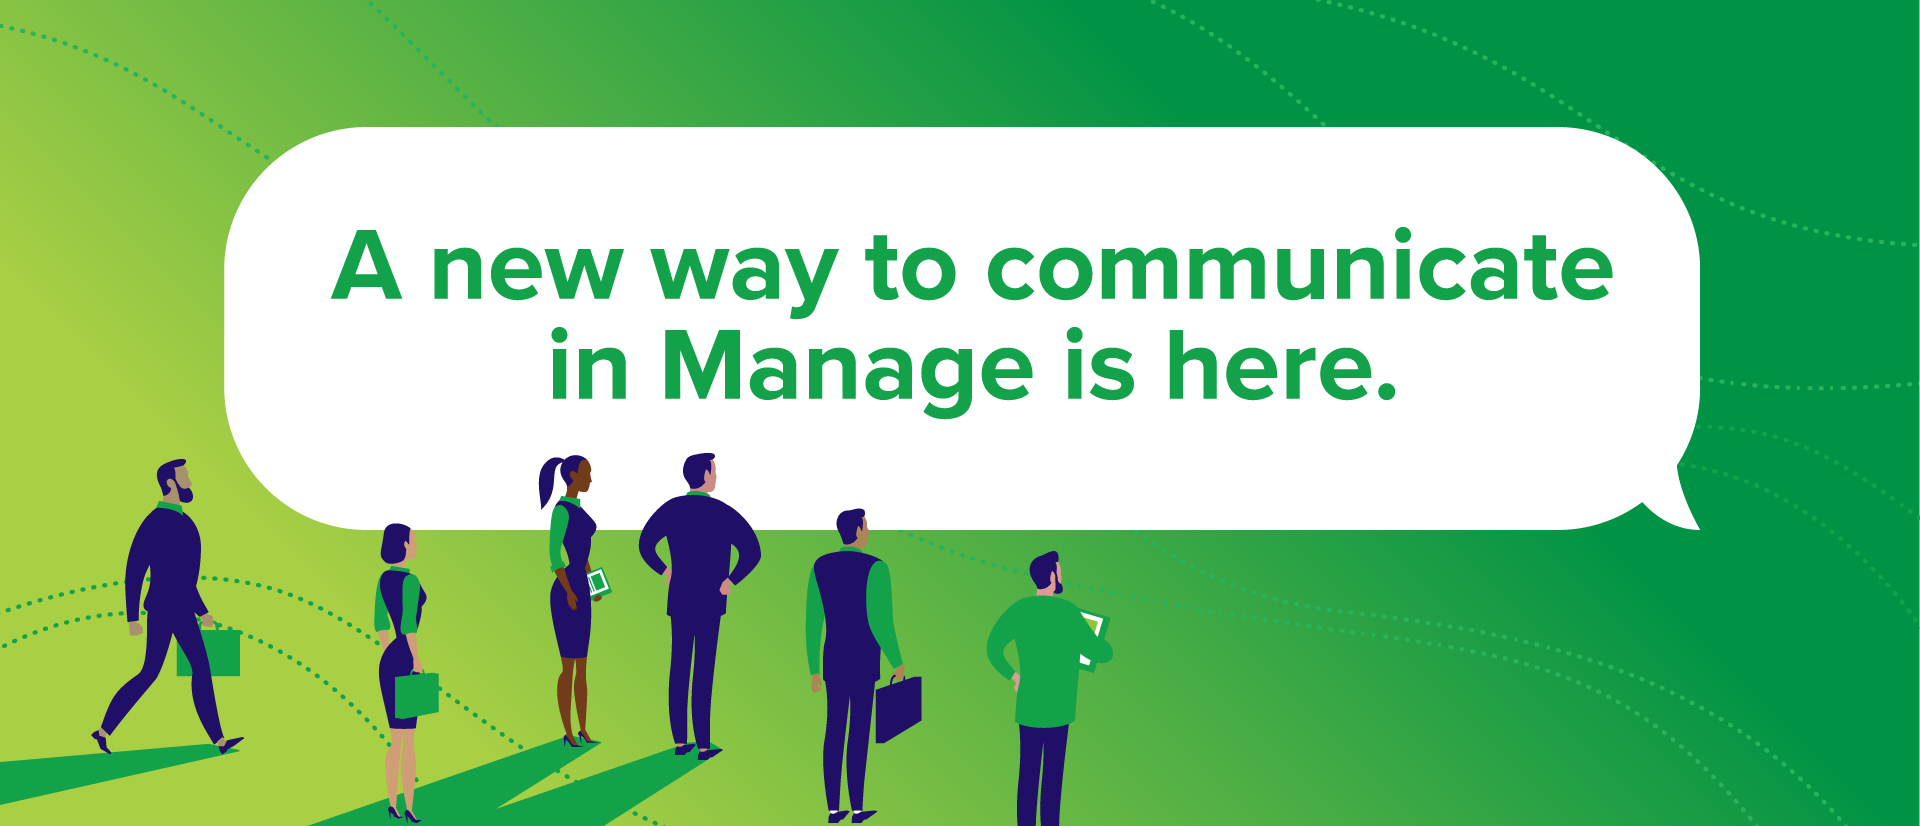 A new way to communicate in Manage is here.